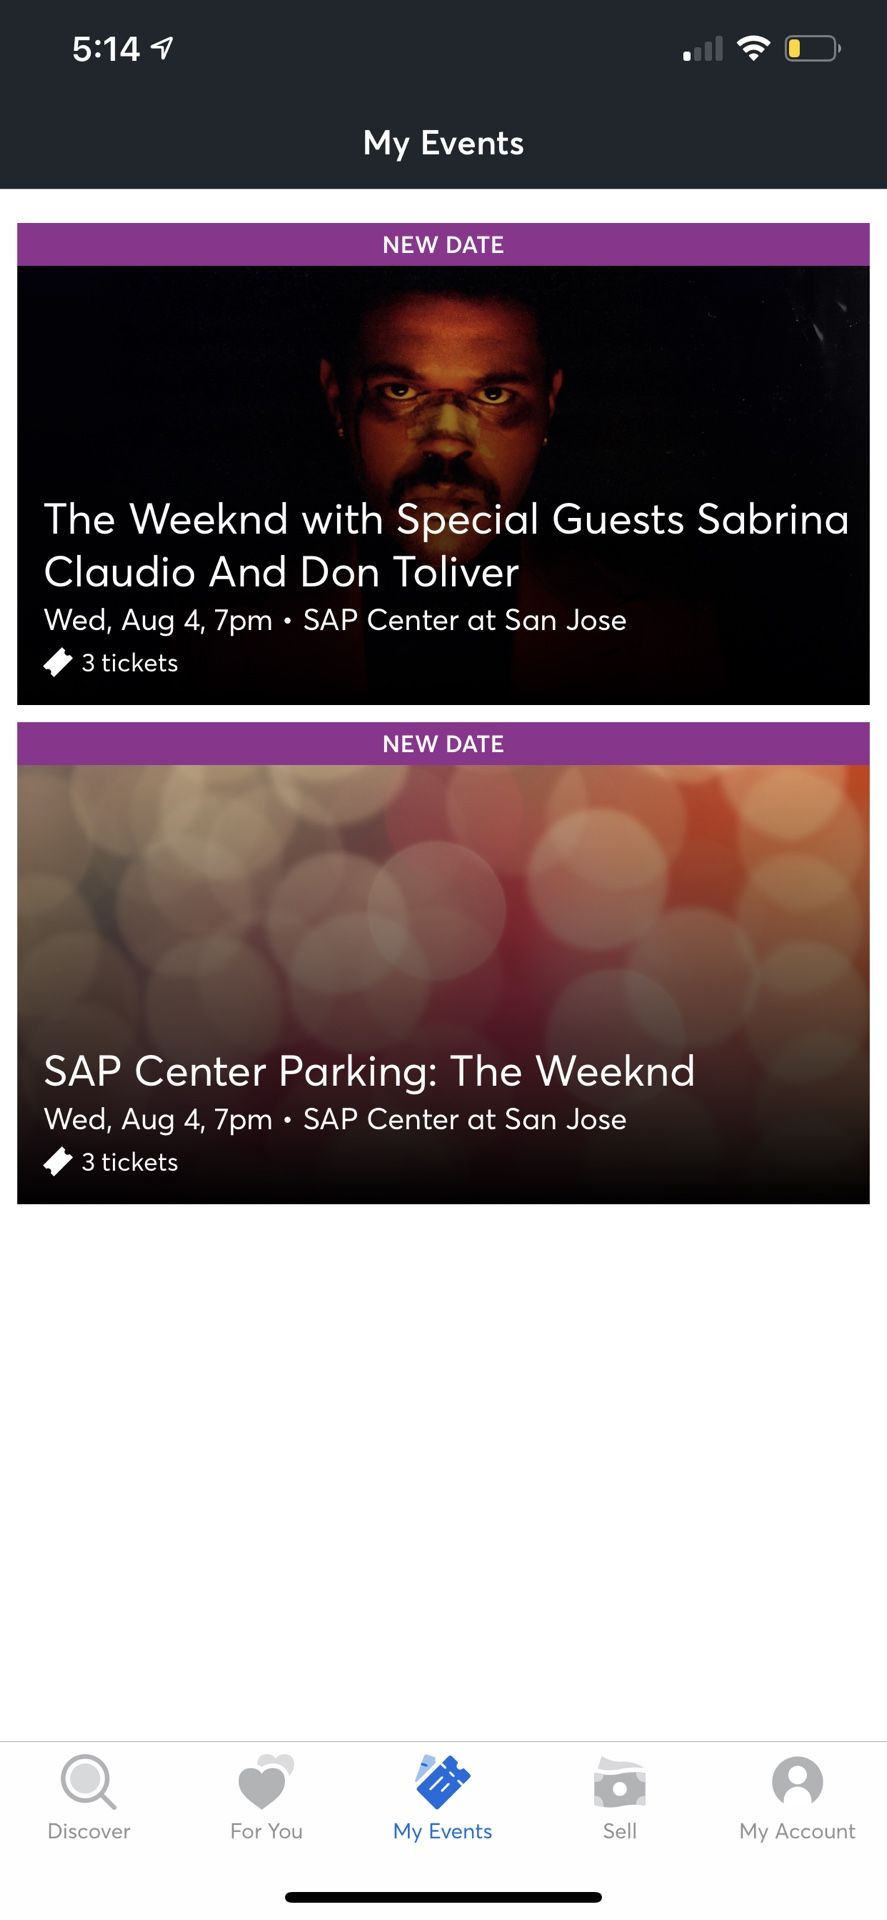 The Weeknd Tickets For San Jose SAP Center